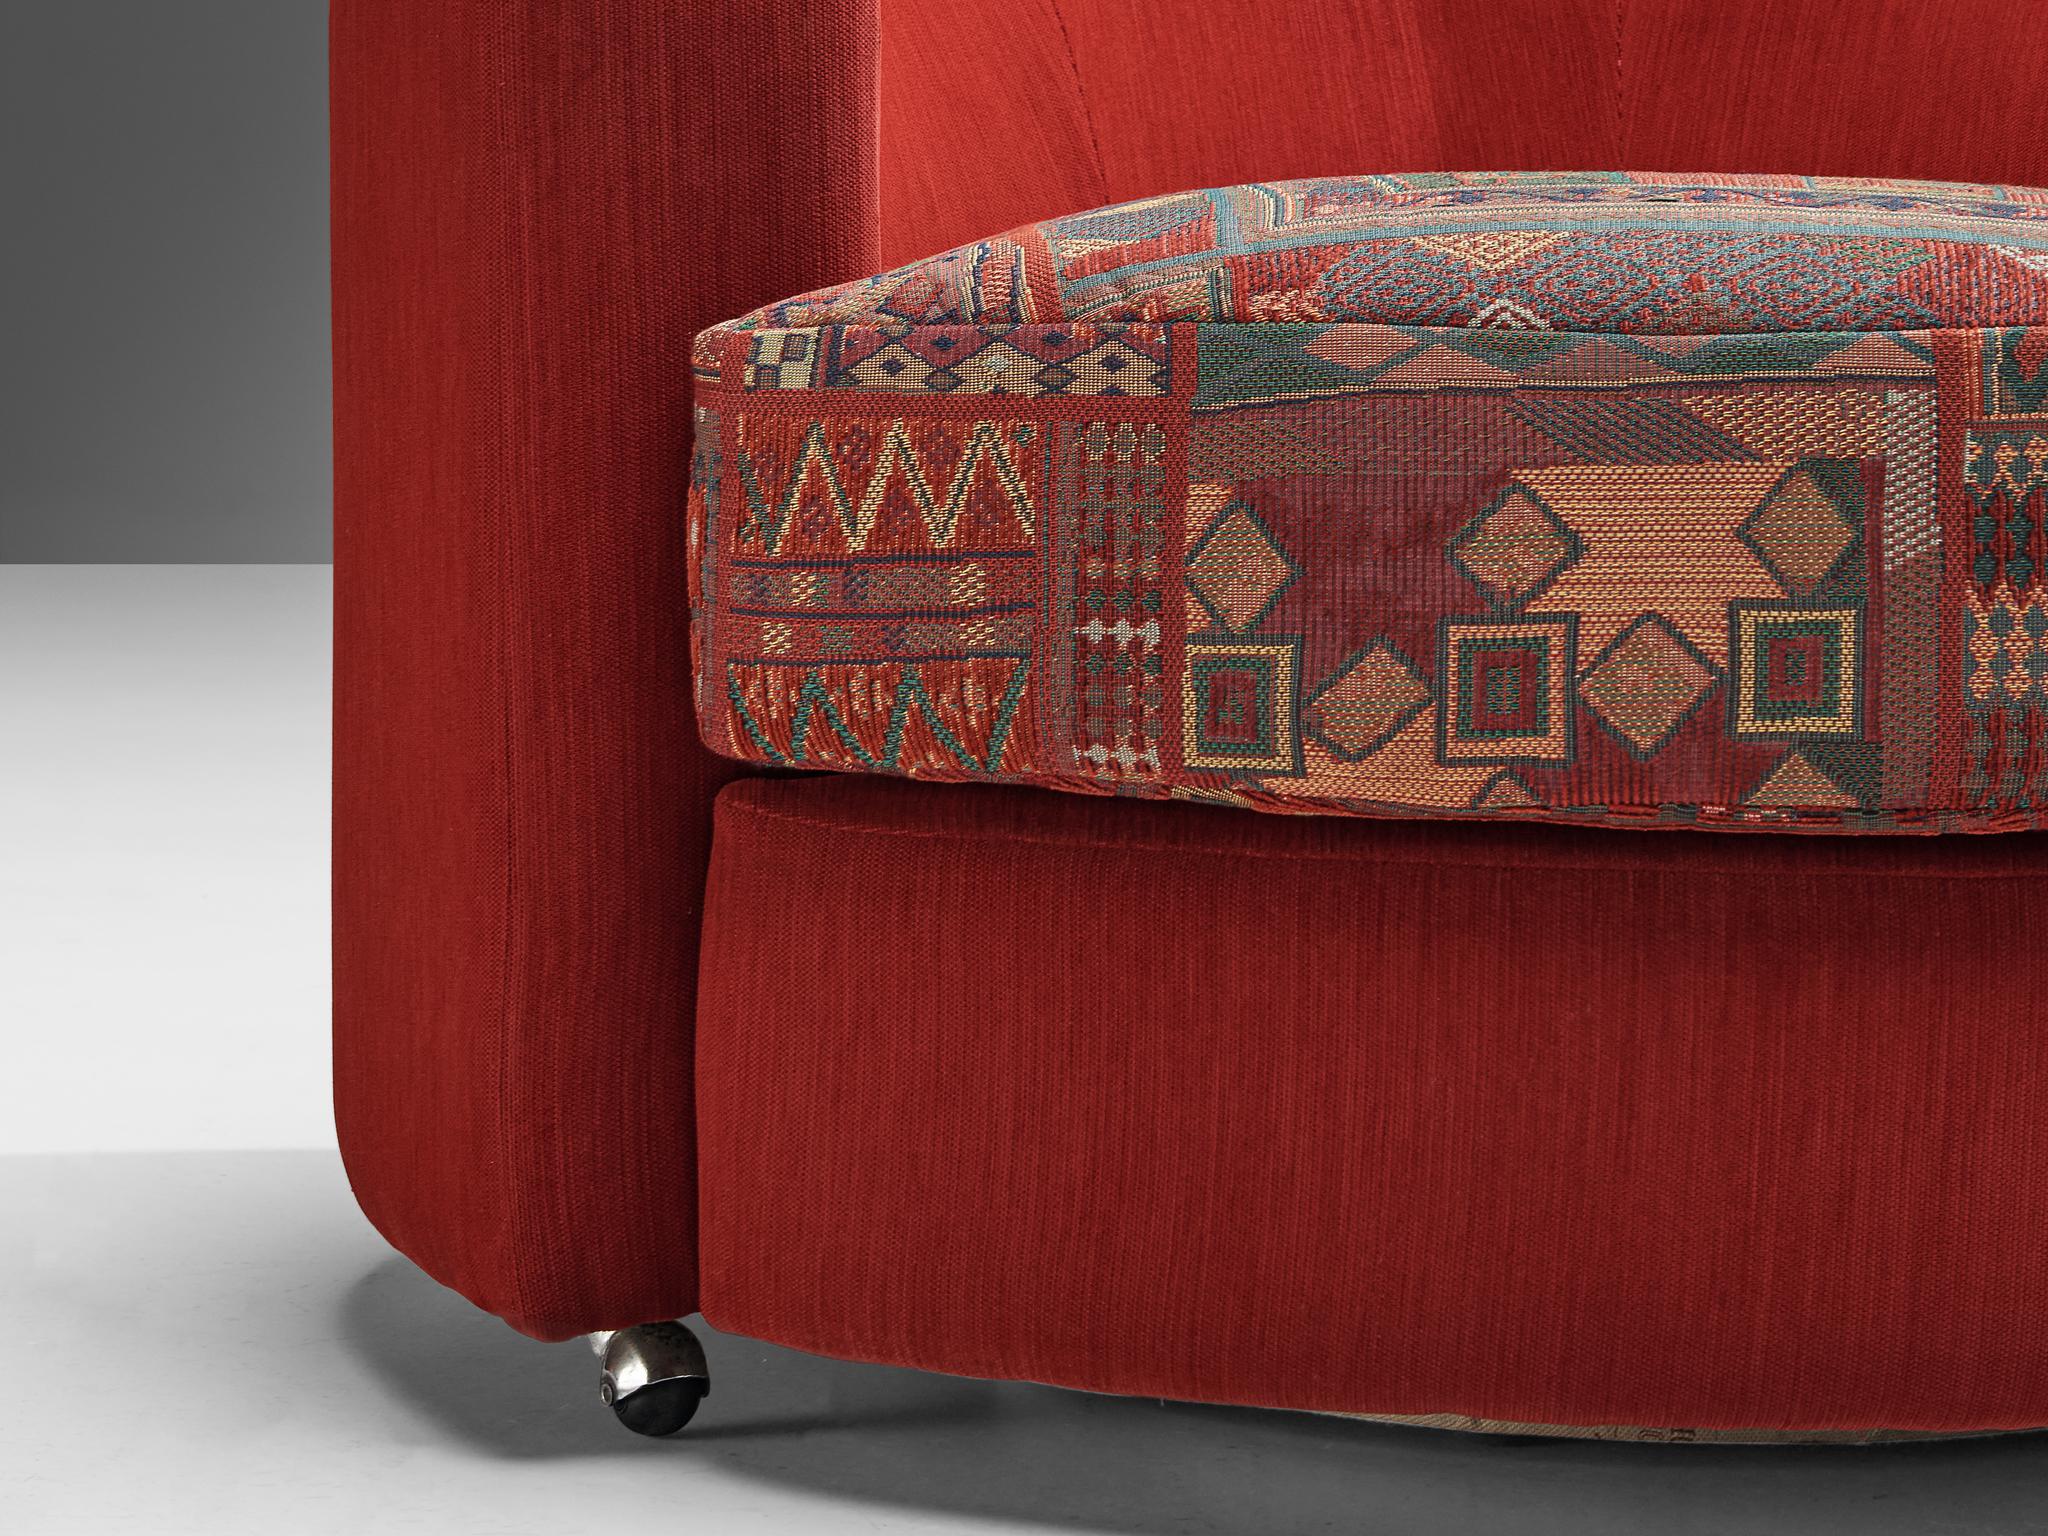 Late 20th Century Roche Bobois Pair of Lounge Chairs in Red and Patterned Upholstery For Sale